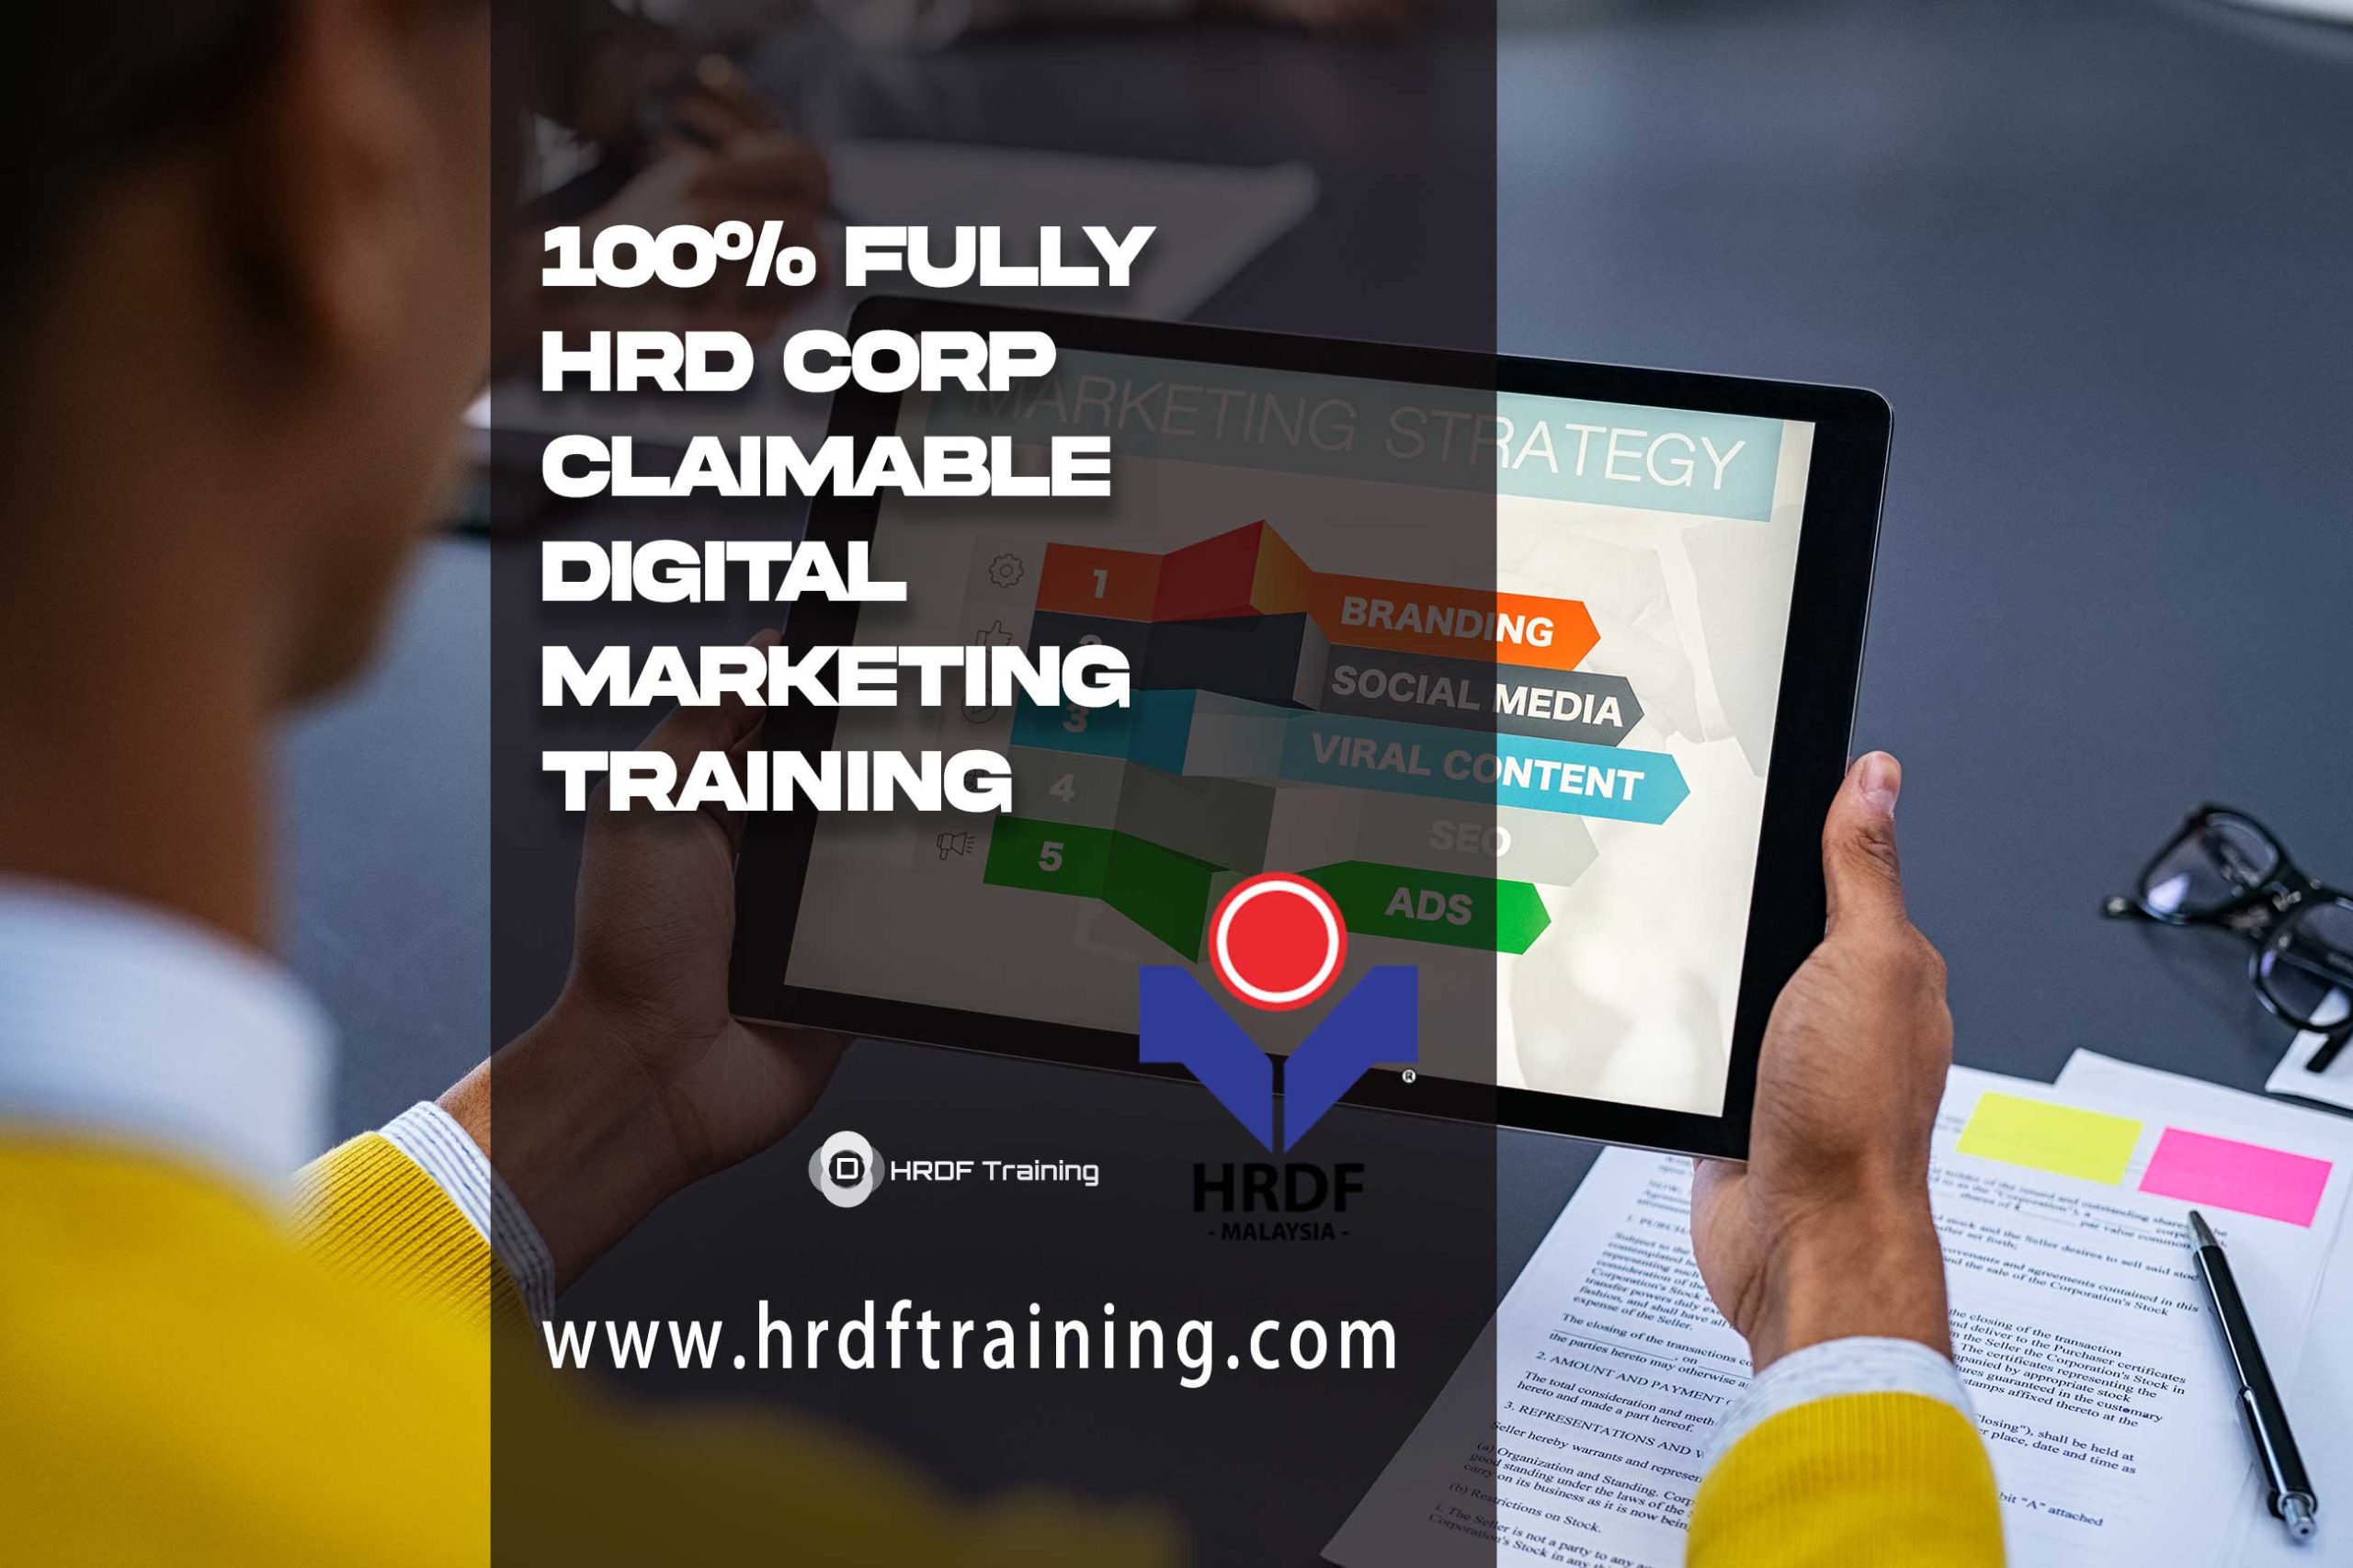 HRD-Corp-Claimable-Digital-Marketing-Training